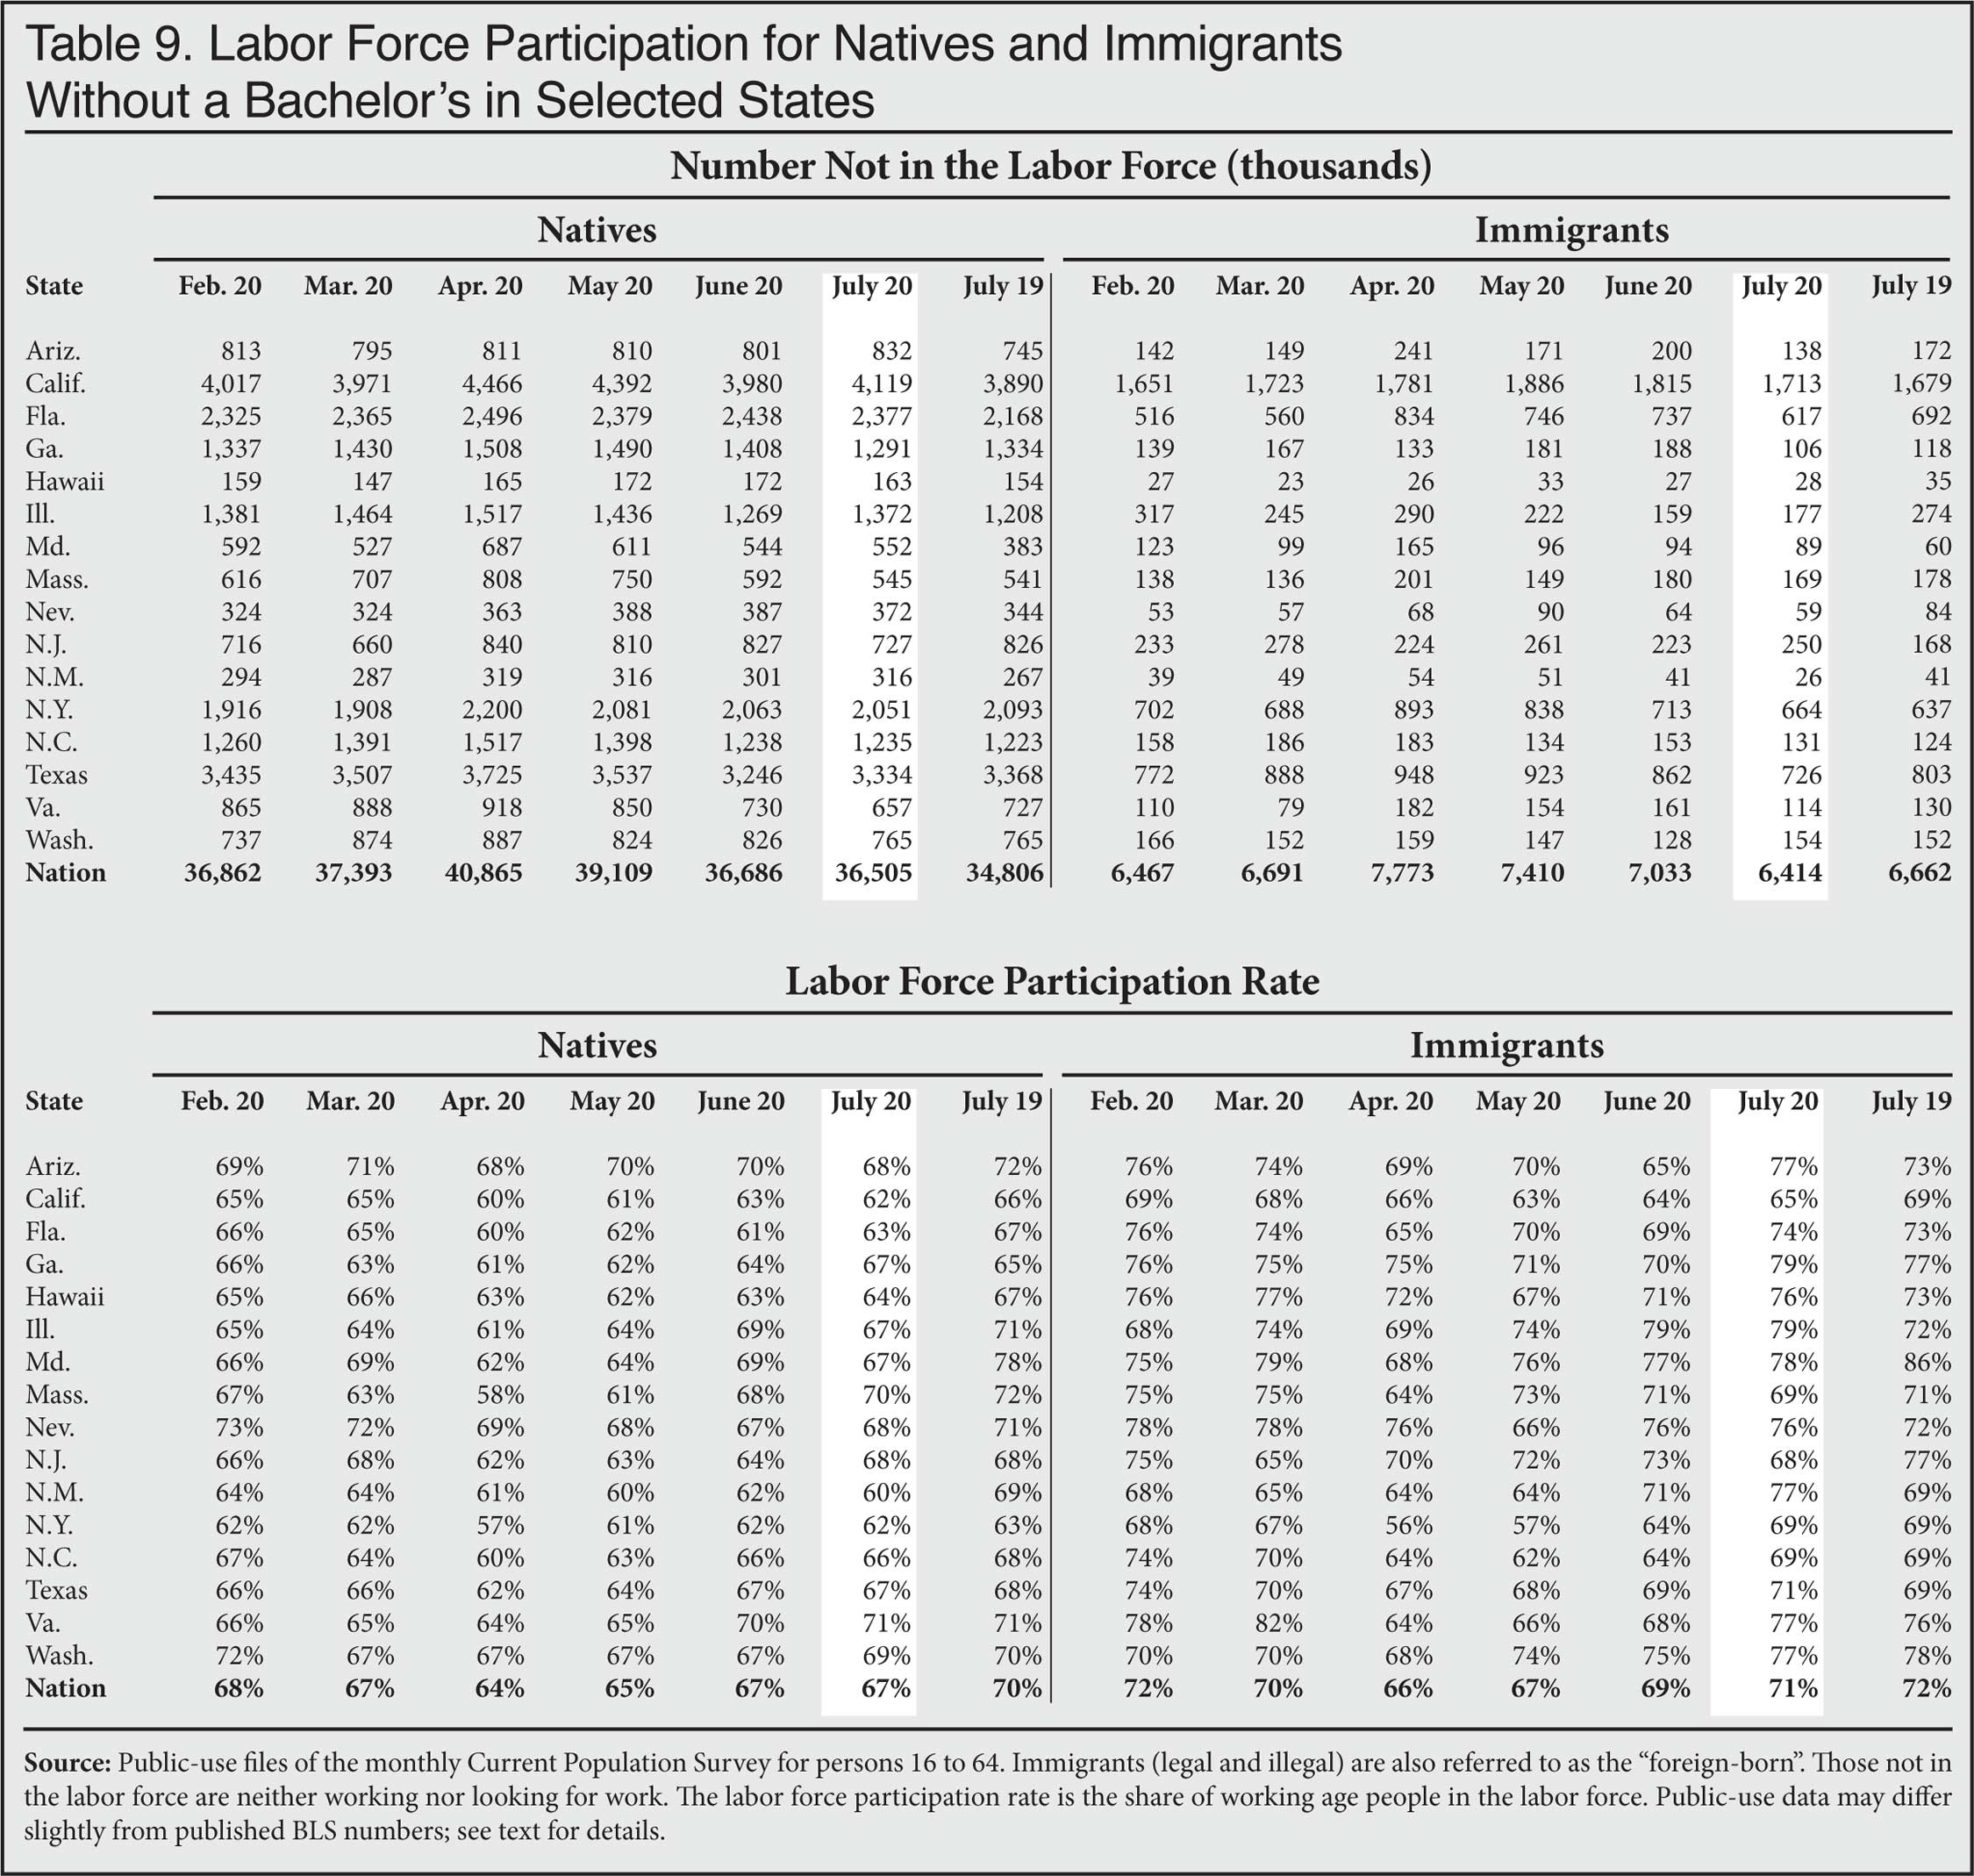 Graph: Labor Force Participation for Natives and Immigrants Without a Bachelor’s by Selected States